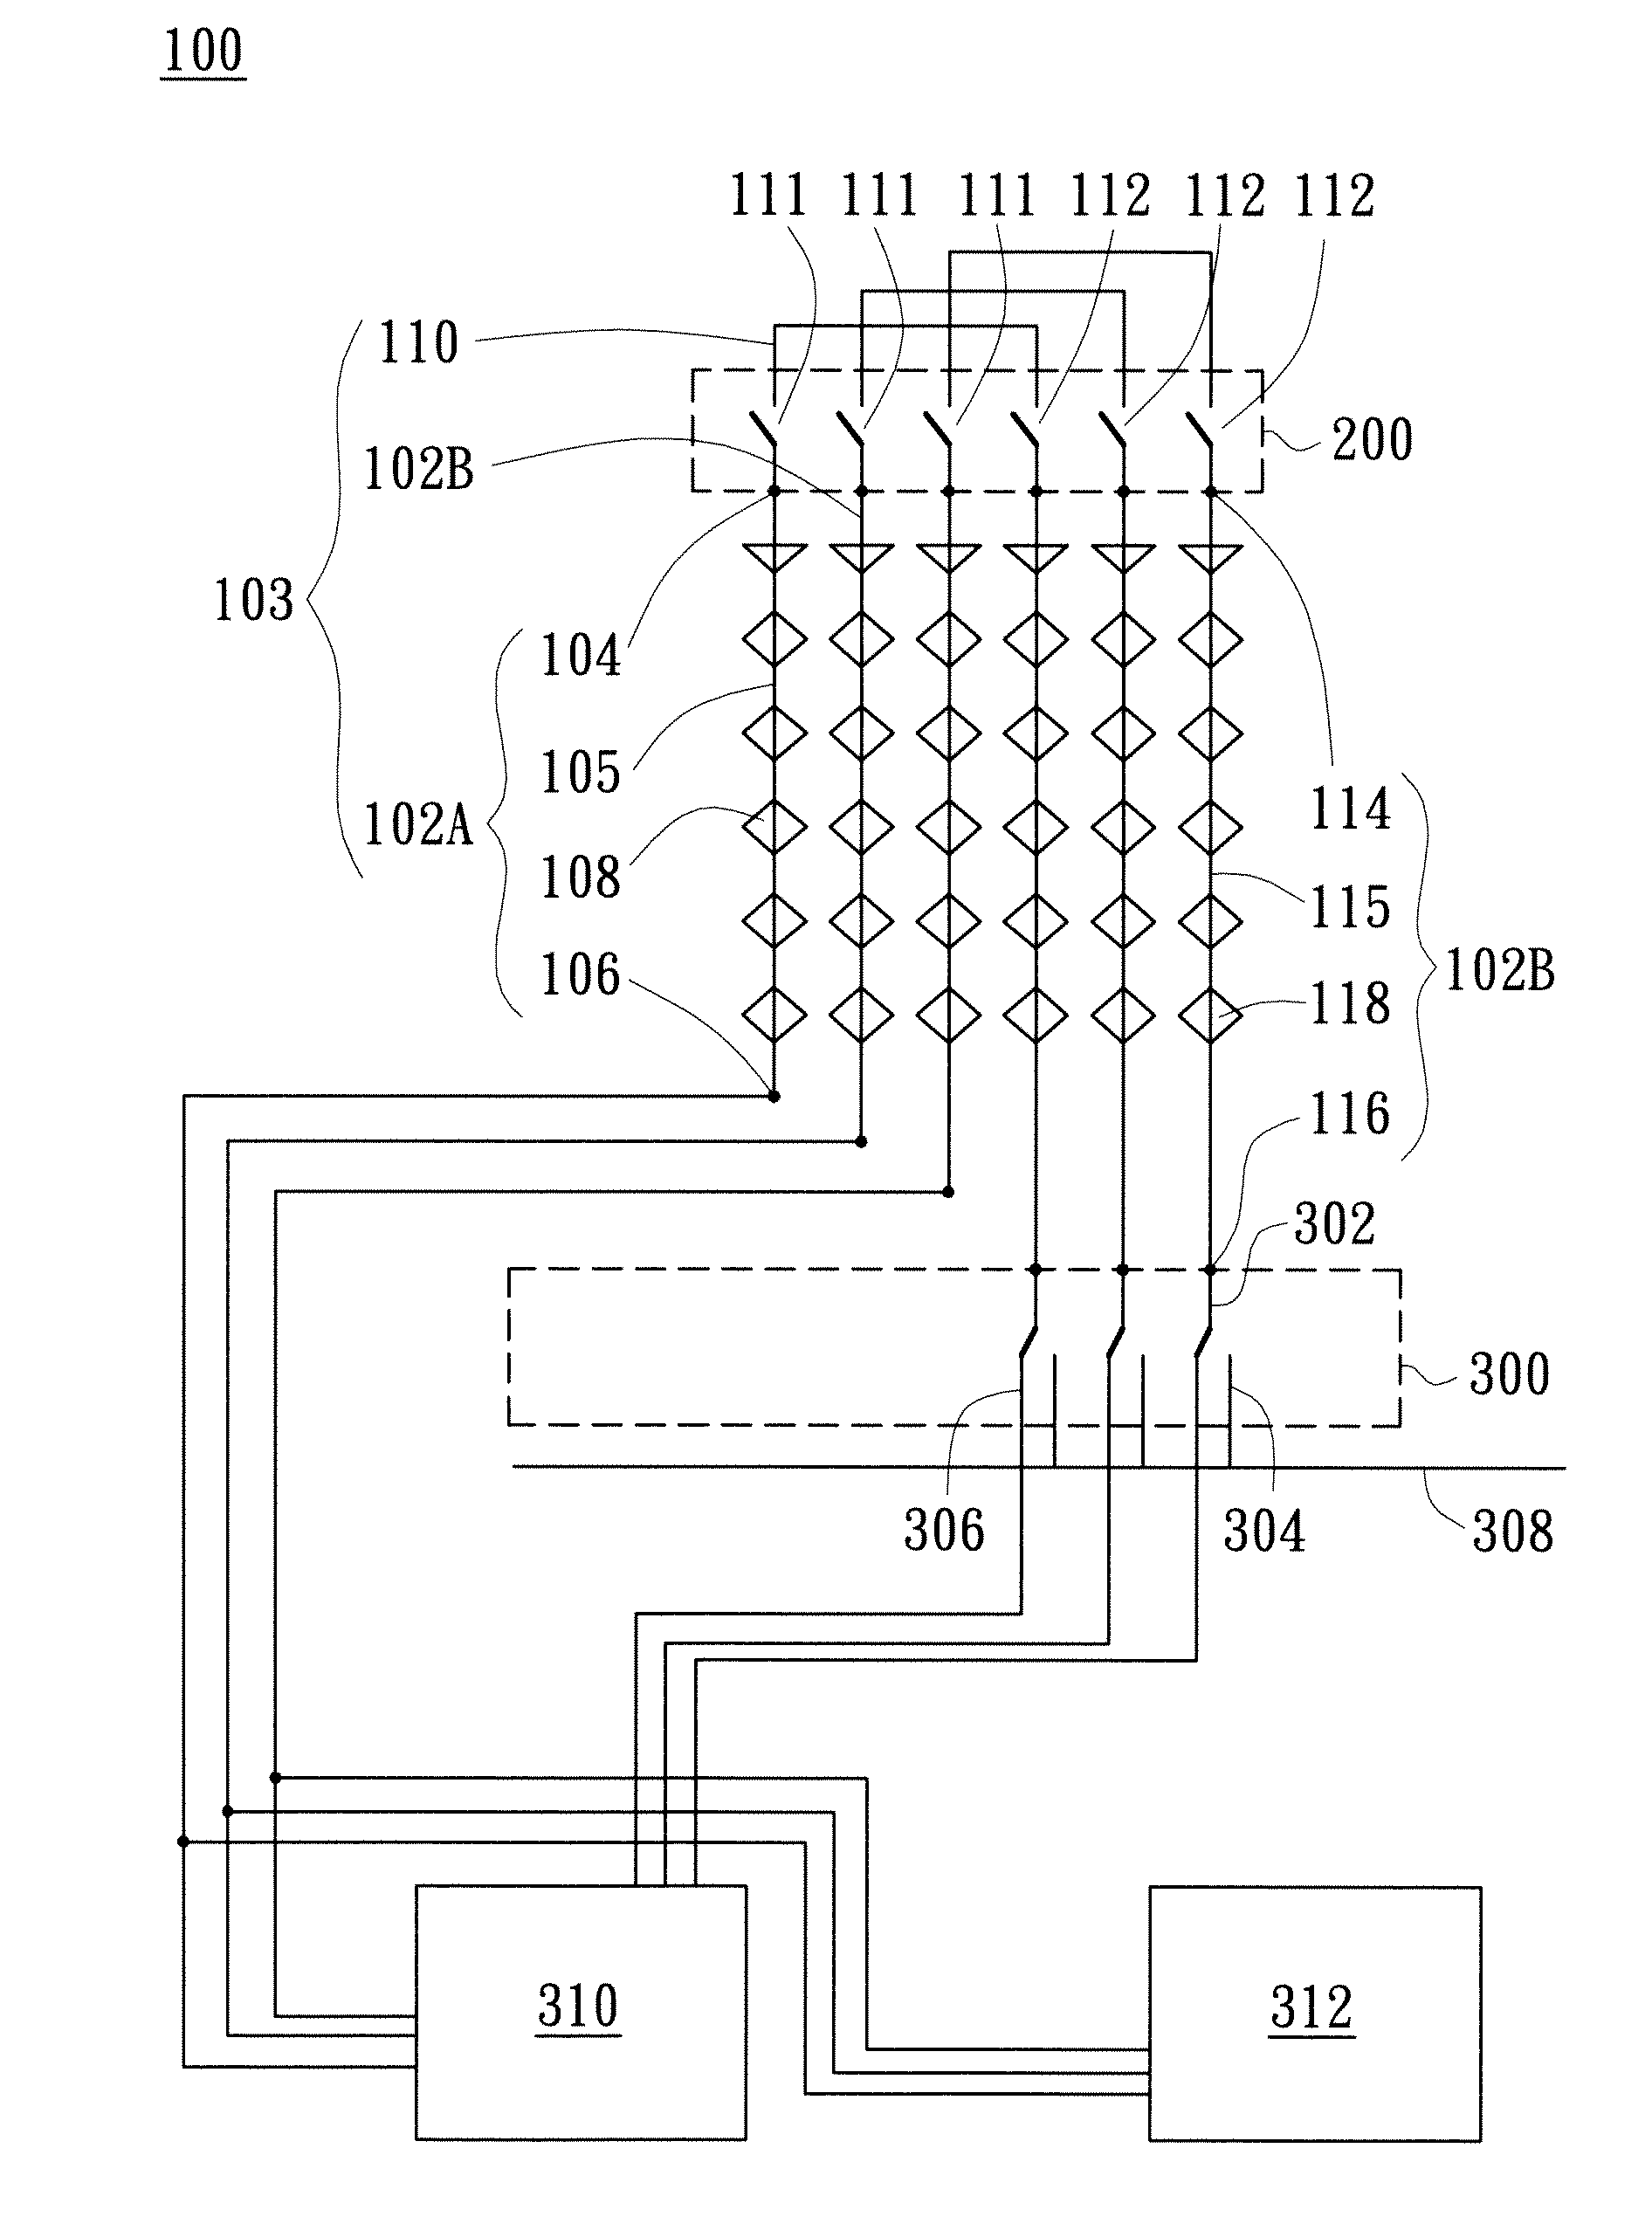 Layout for antenna loops having both functions of capacitance induction and electromagnetic induction